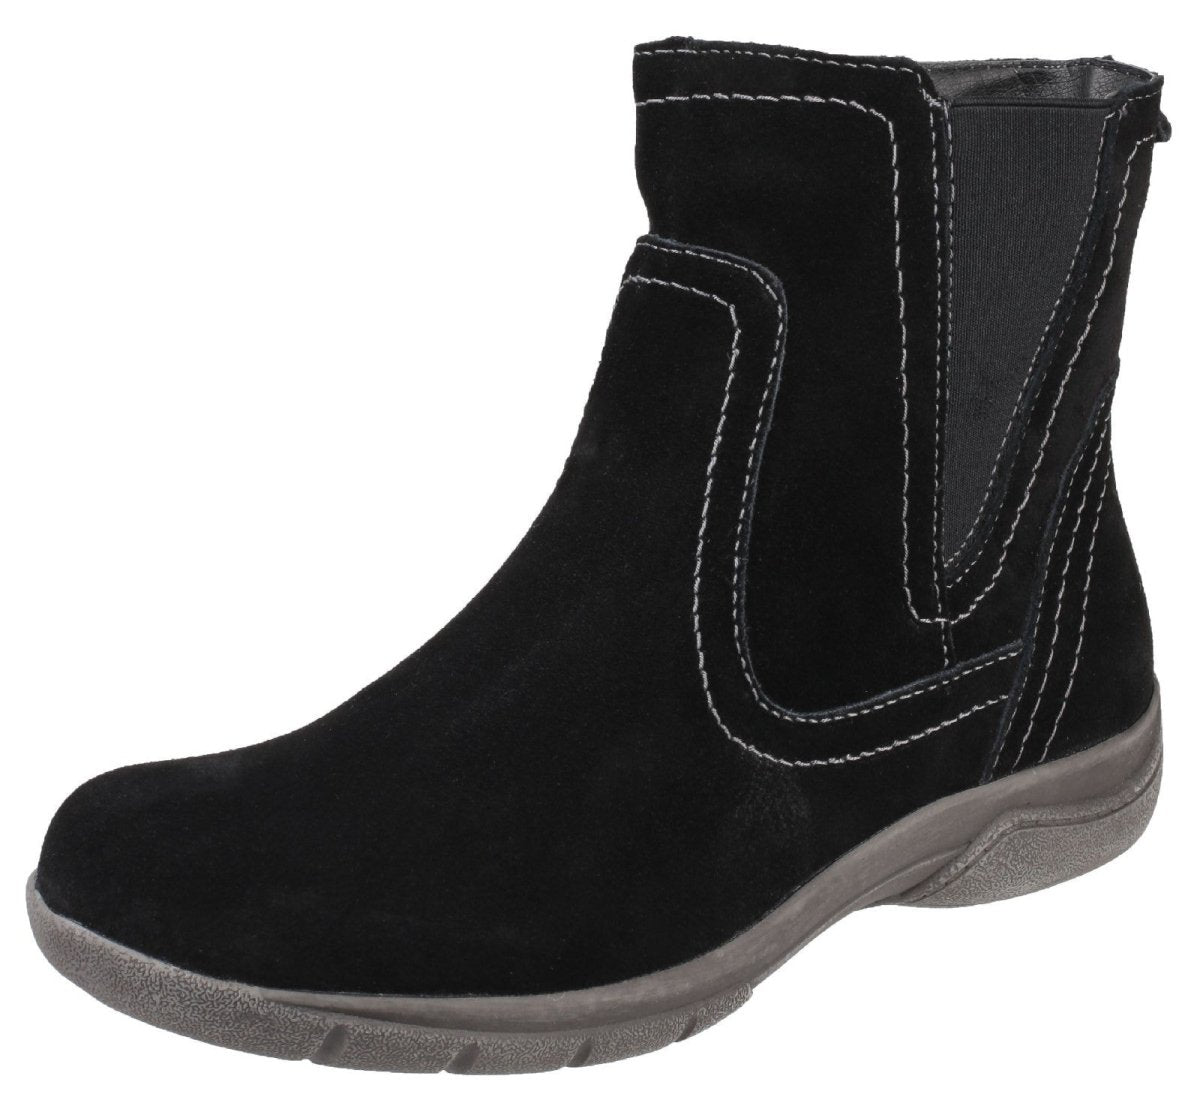 Fleet & Foster Malmo Ankle Boot Ladies Ankle Boots - Shoe Store Direct